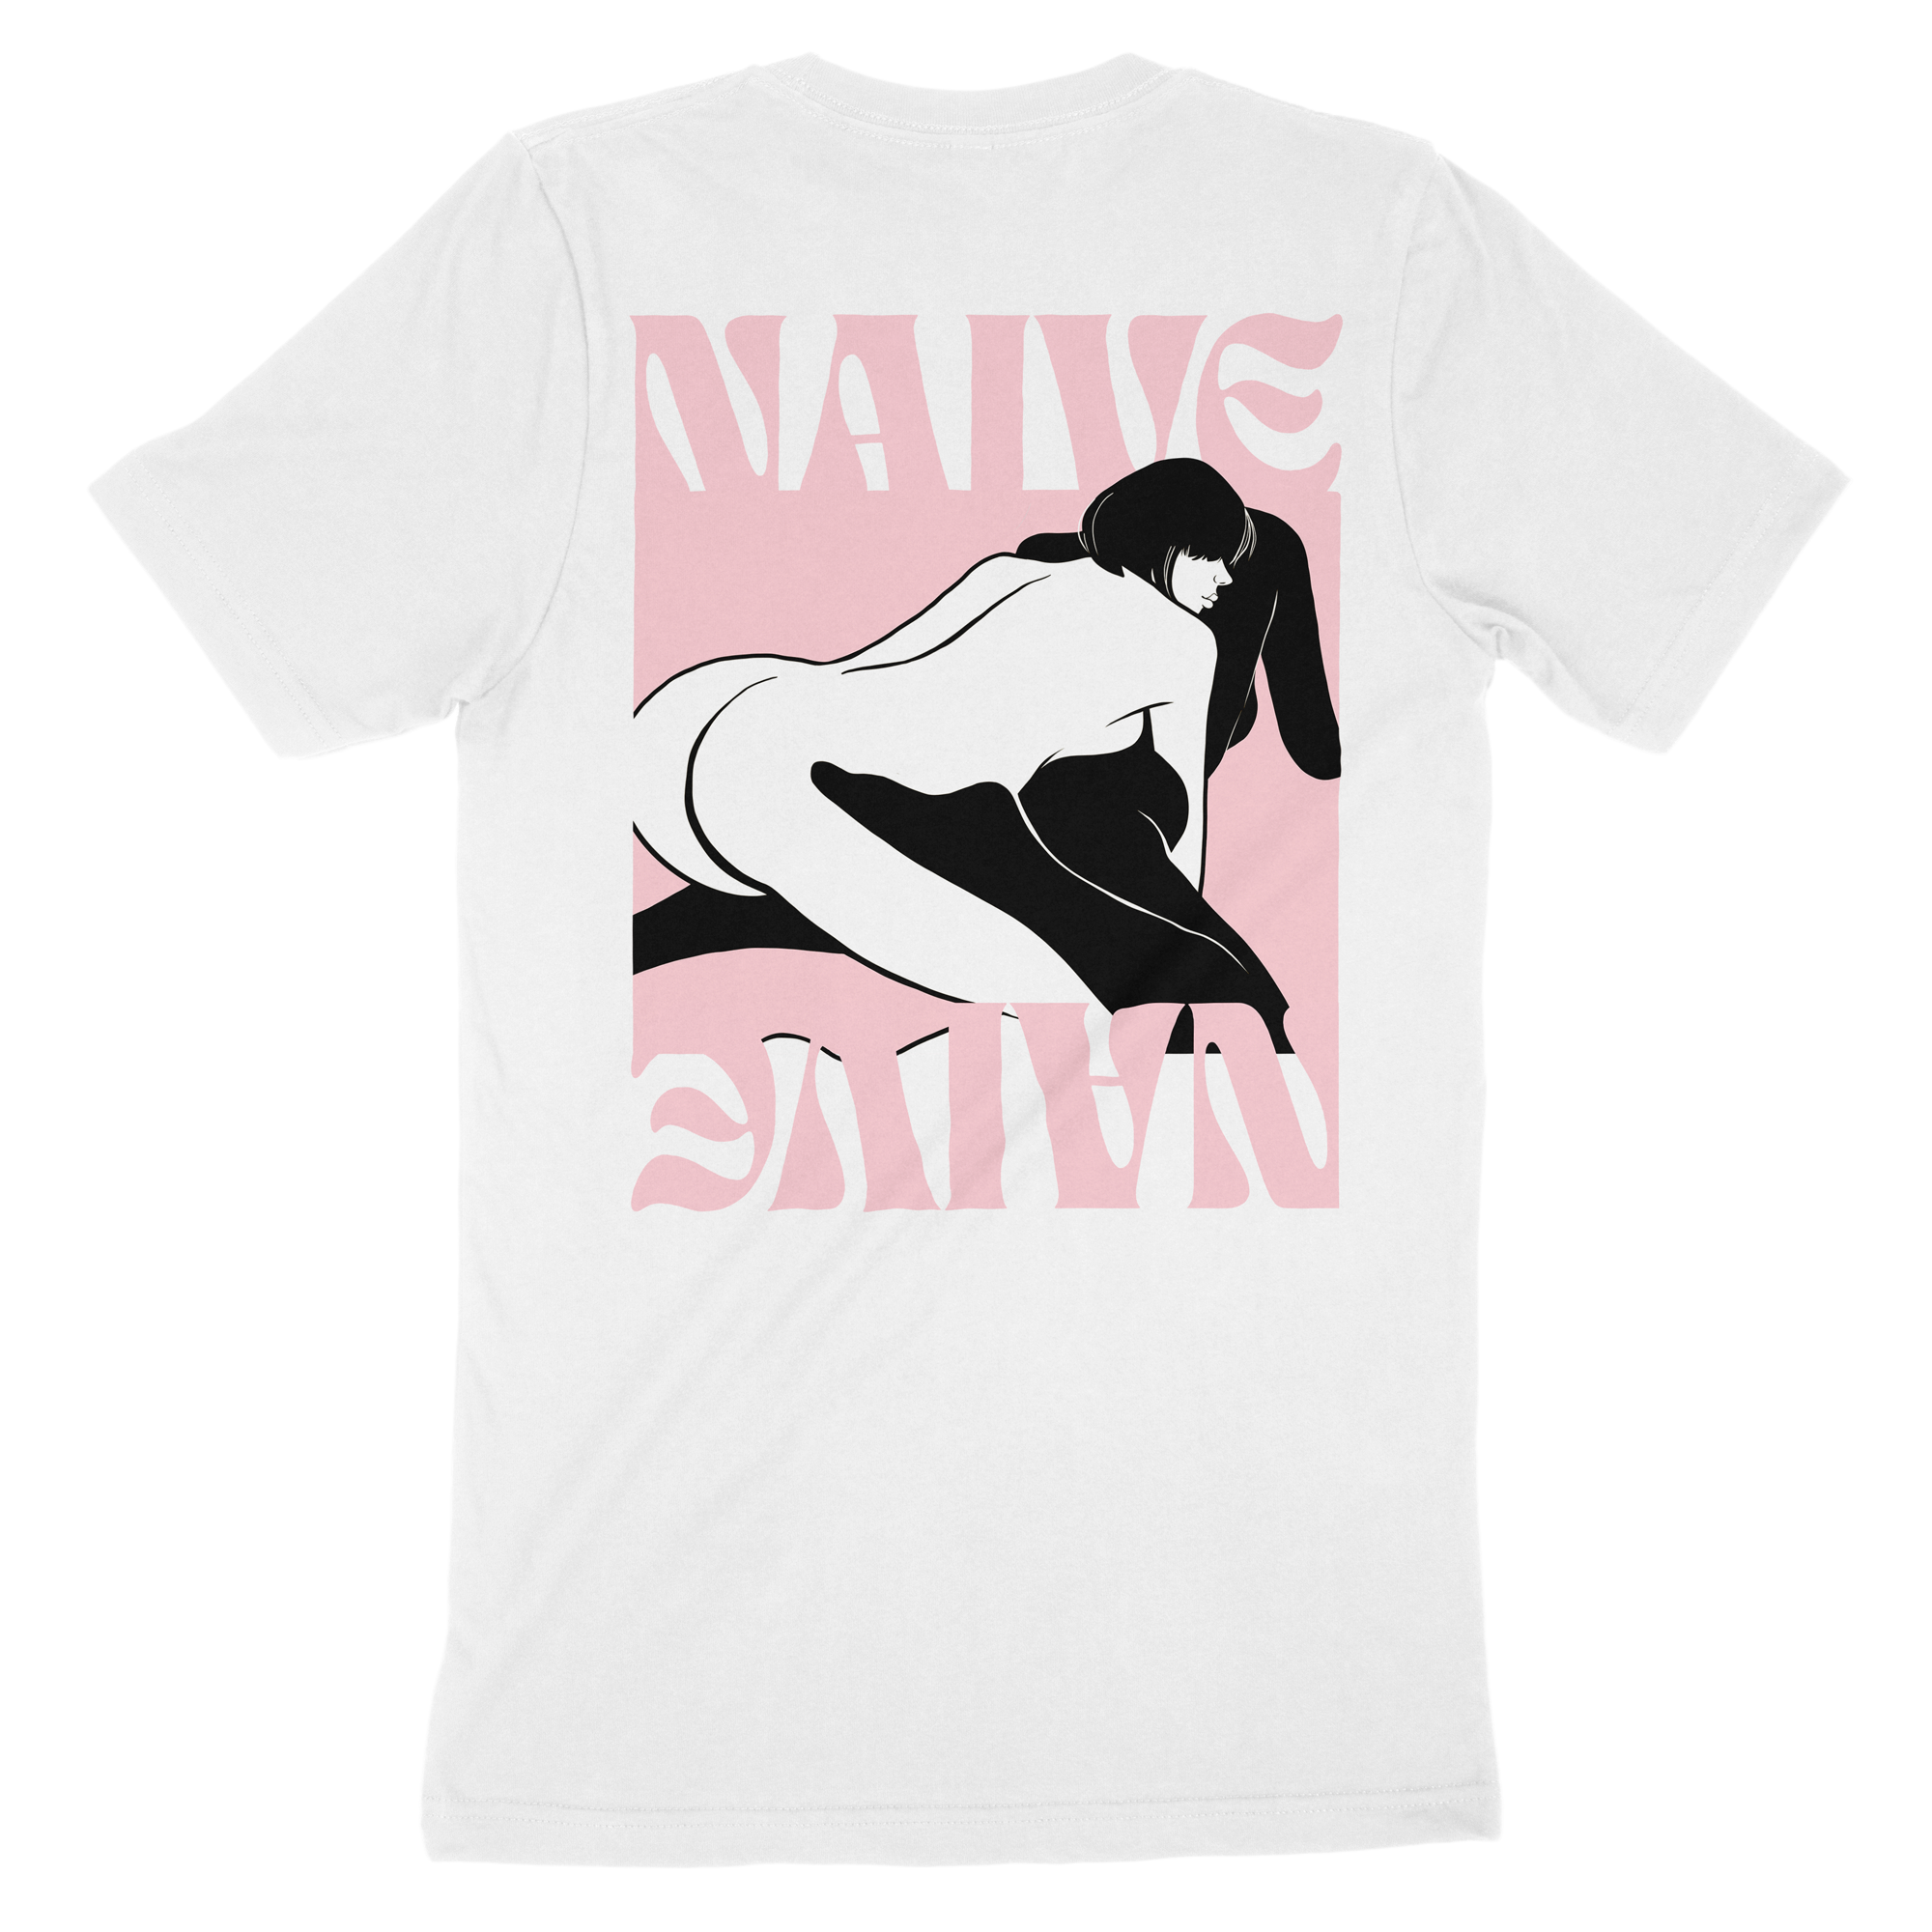 NAIVE - Stay with Me - Tshirt